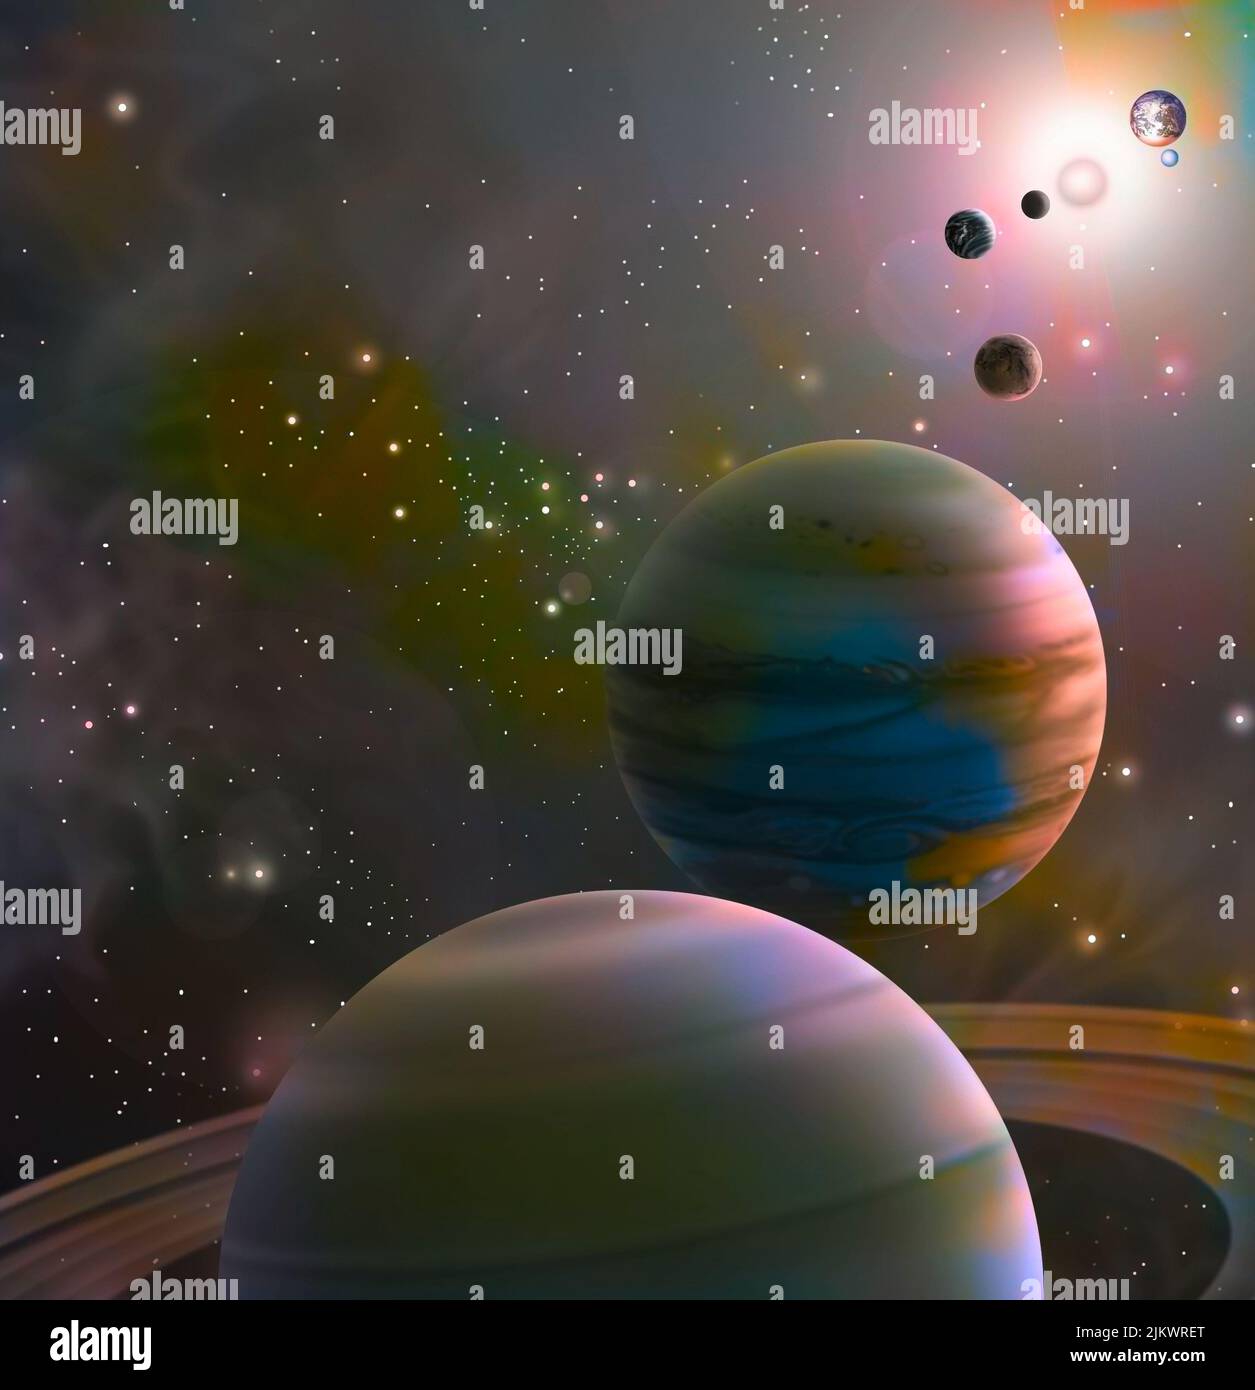 Alignment of the planets planned by astrologers for May 5, 2000. Stock Photo